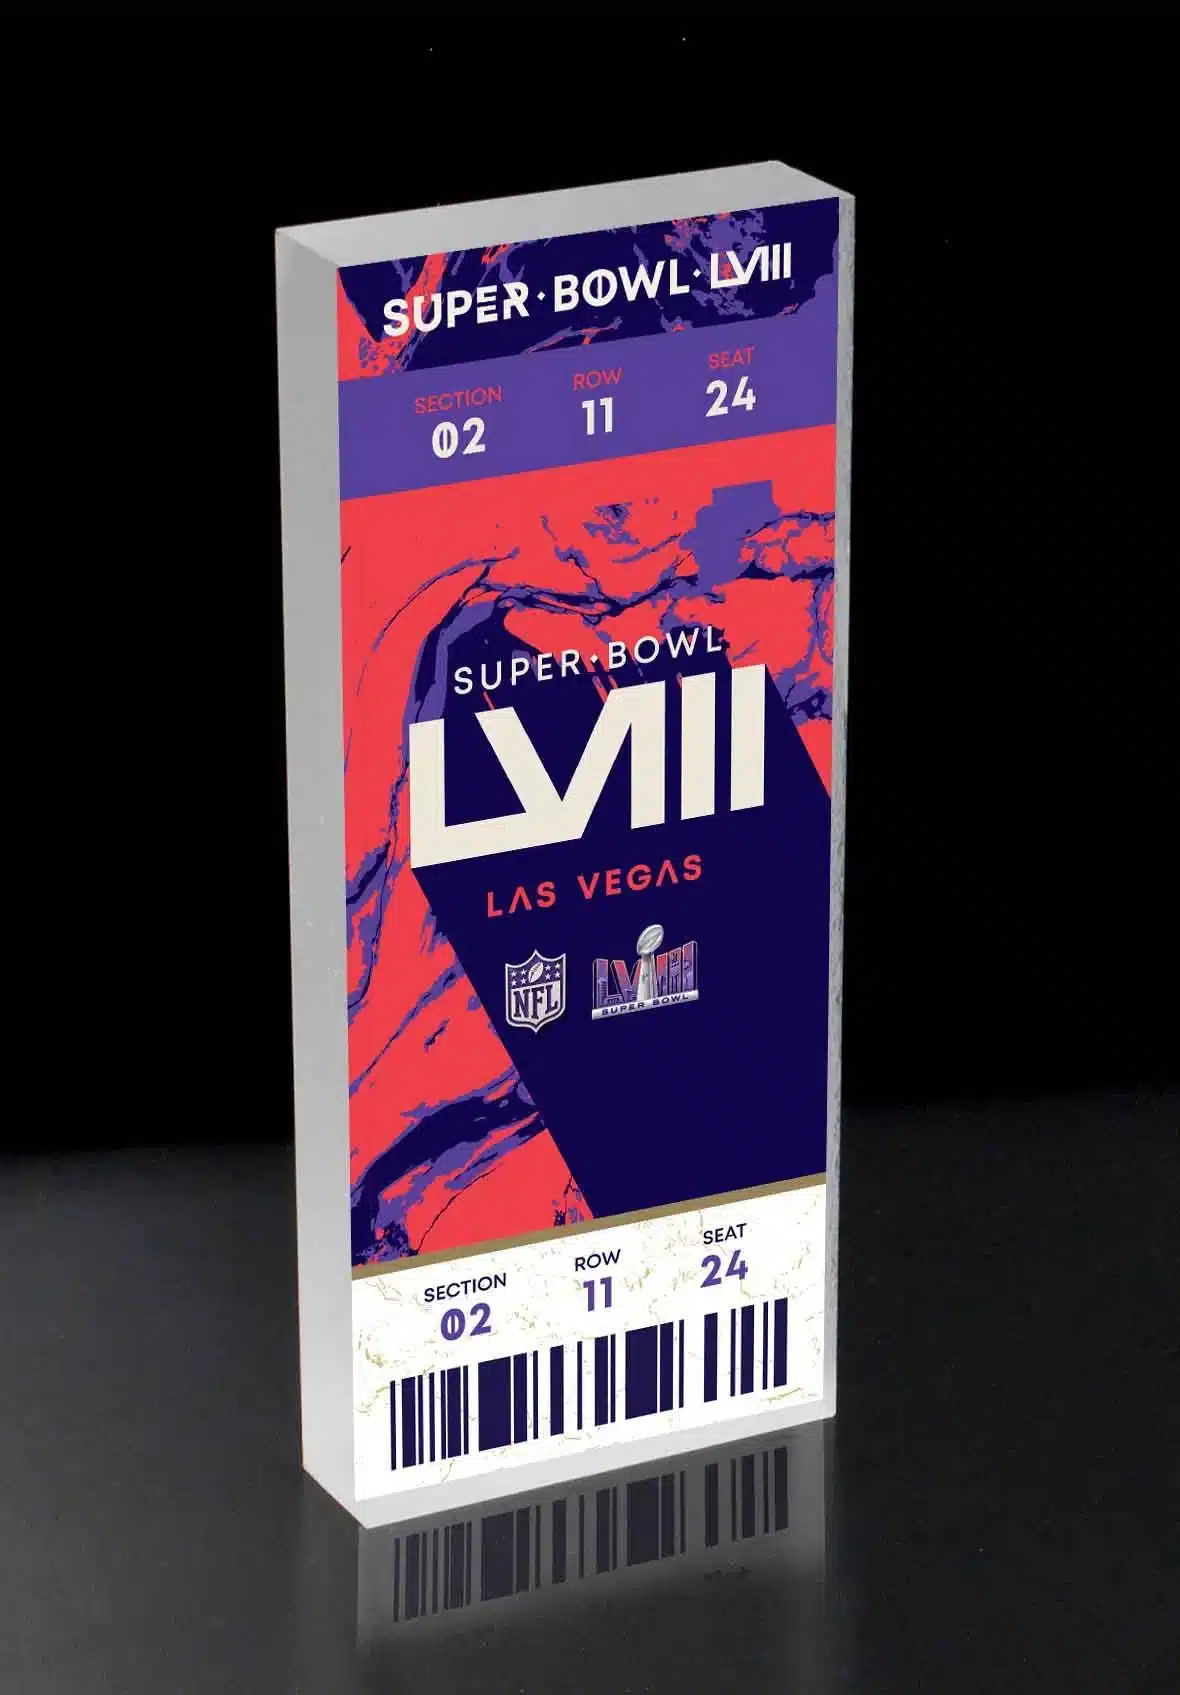 Super Bowl LVIII Tickets Over 5,500 More Expensive Than 2023